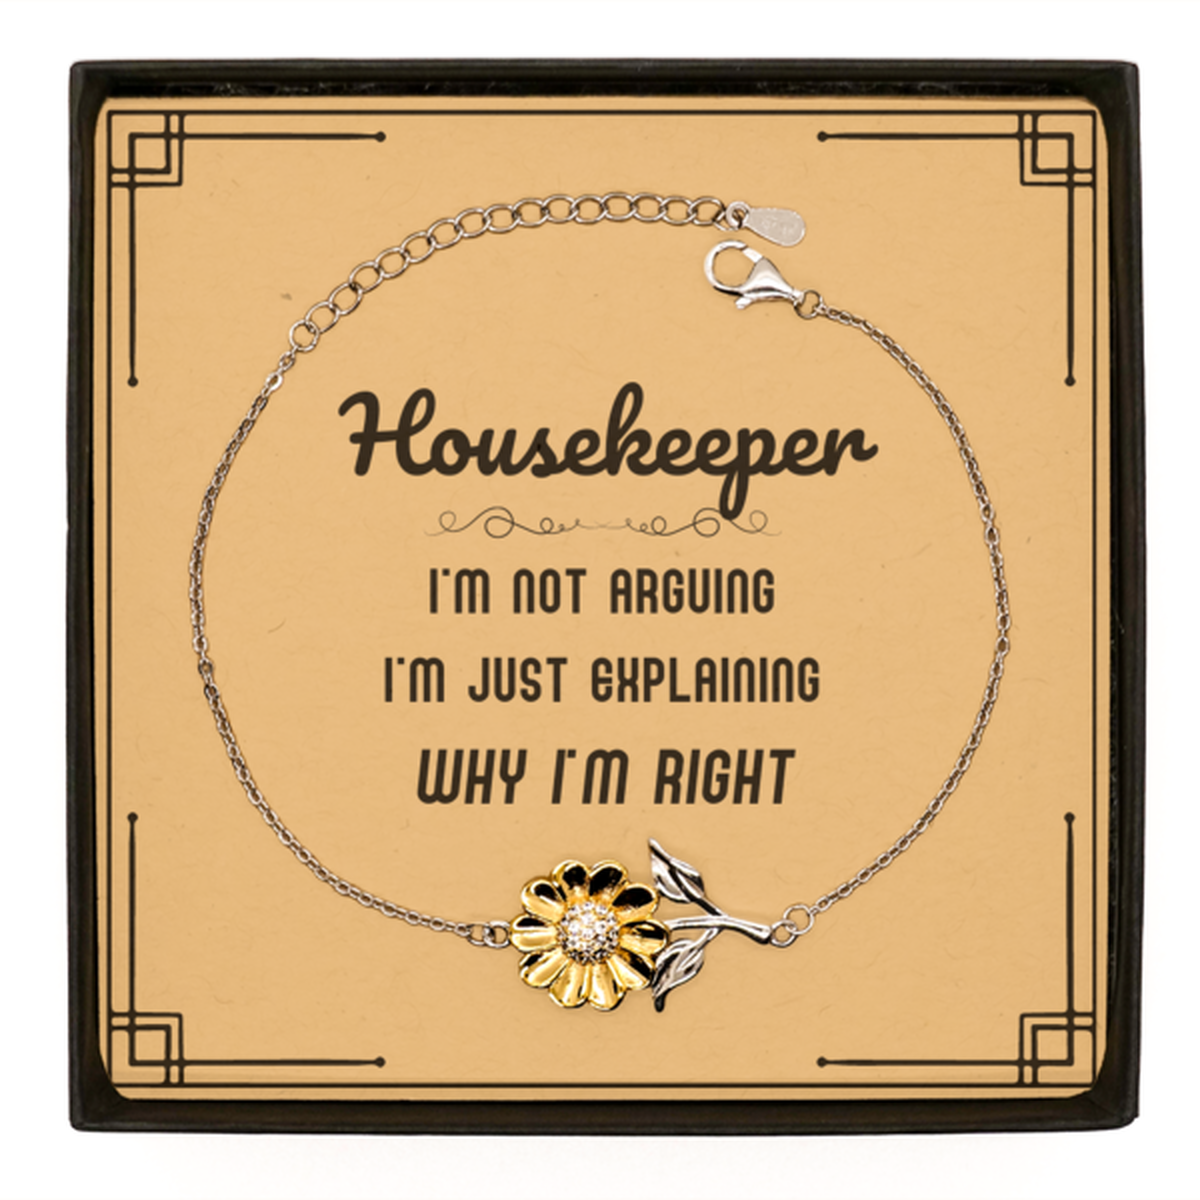 Housekeeper I'm not Arguing. I'm Just Explaining Why I'm RIGHT Sunflower Bracelet, Funny Saying Quote Housekeeper Gifts For Housekeeper Message Card Graduation Birthday Christmas Gifts for Men Women Coworker